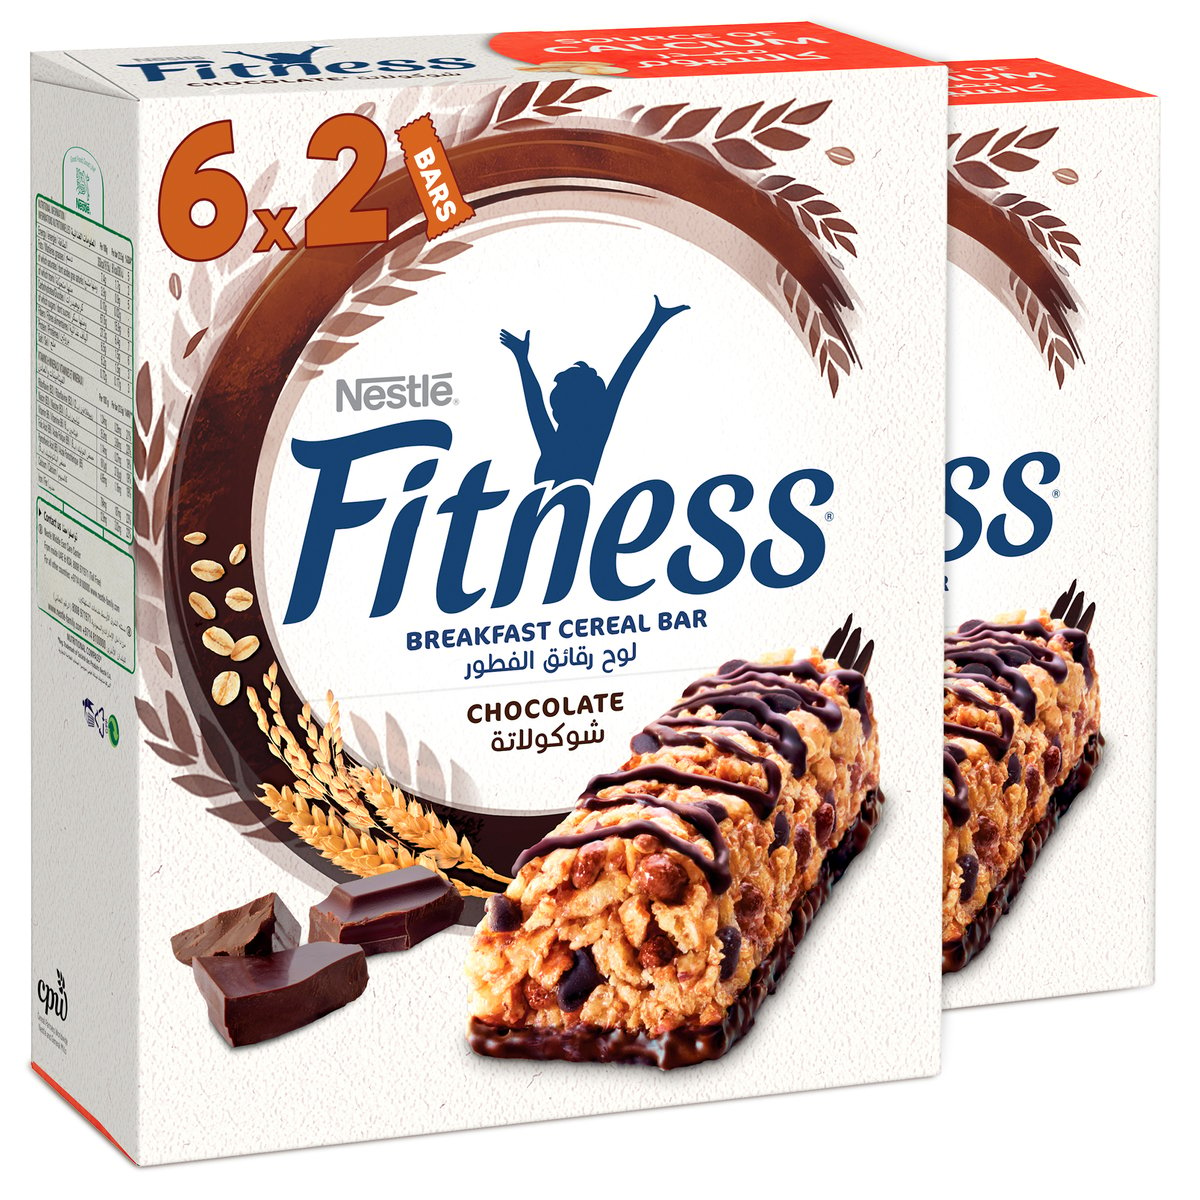 Nestle Fitness Chocolate Breakfast Cereal Bar 12 x 23.5 g